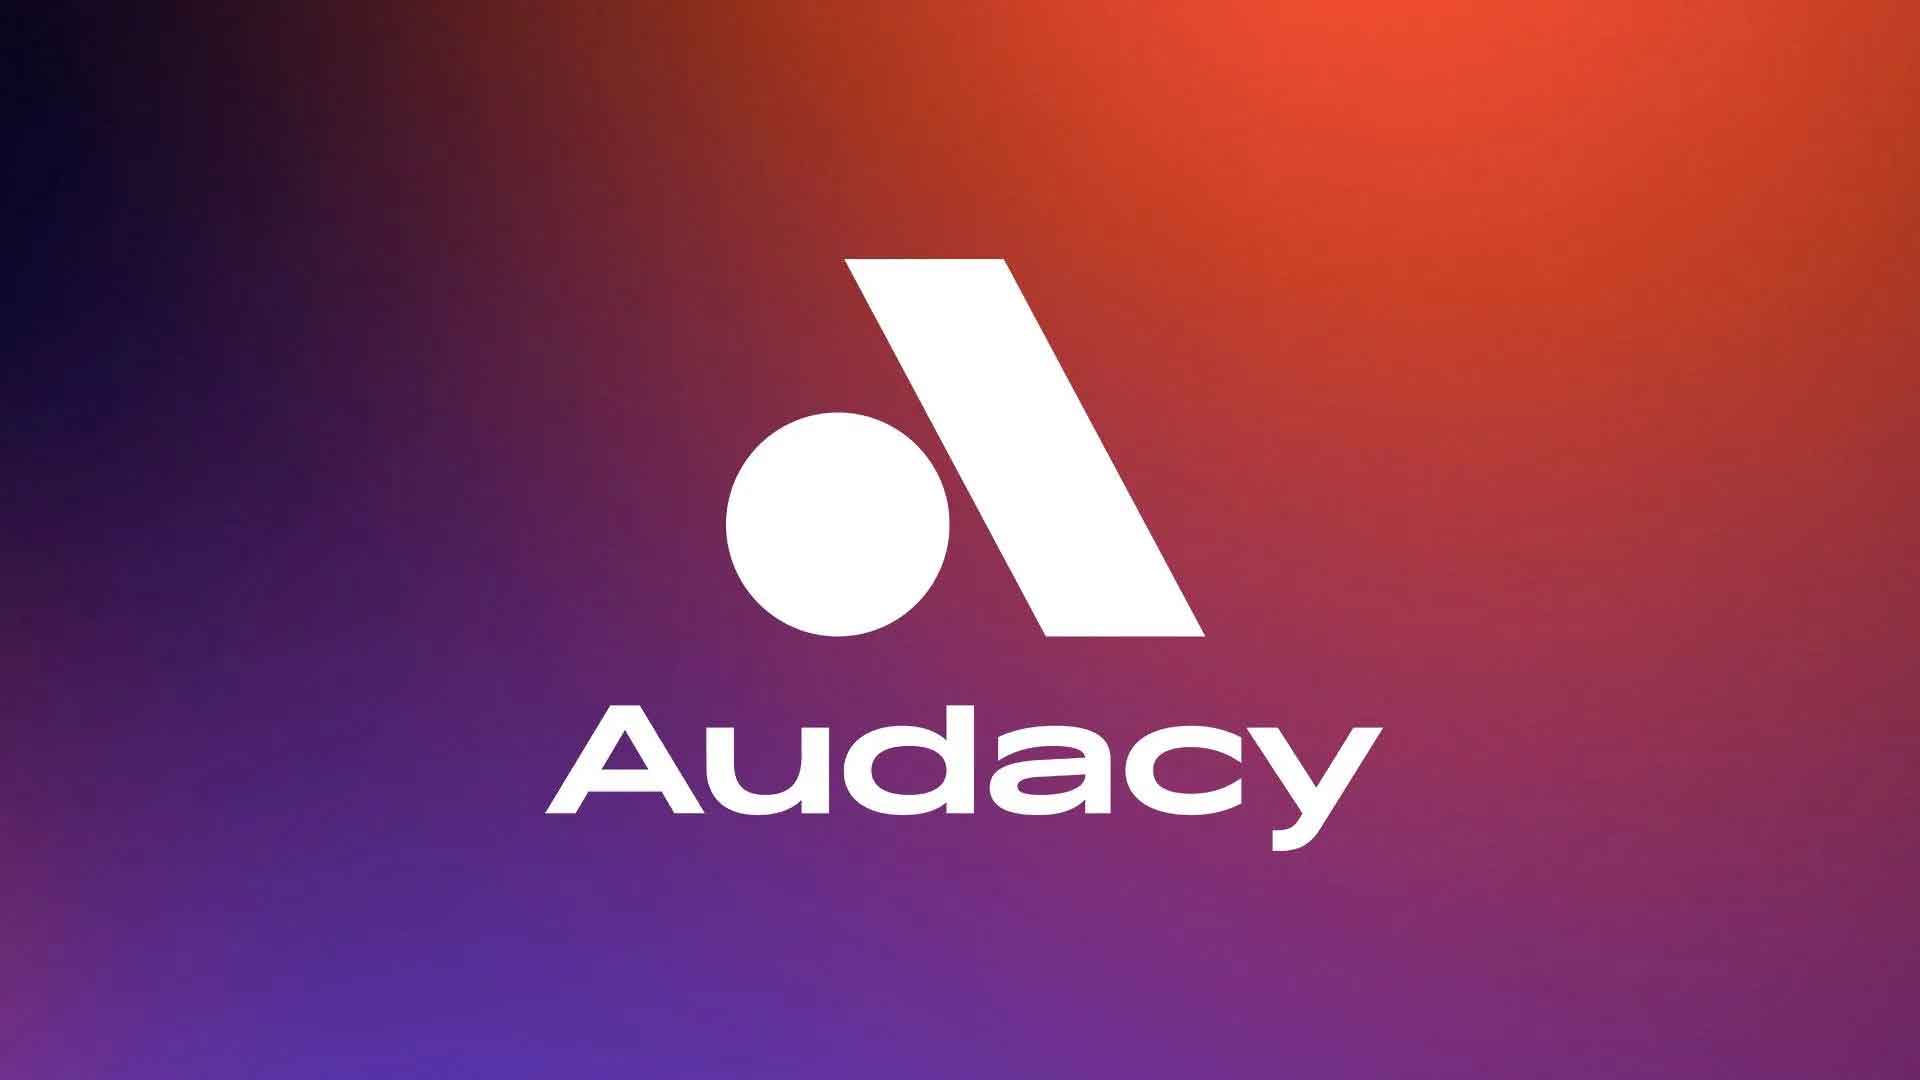 About Audacy